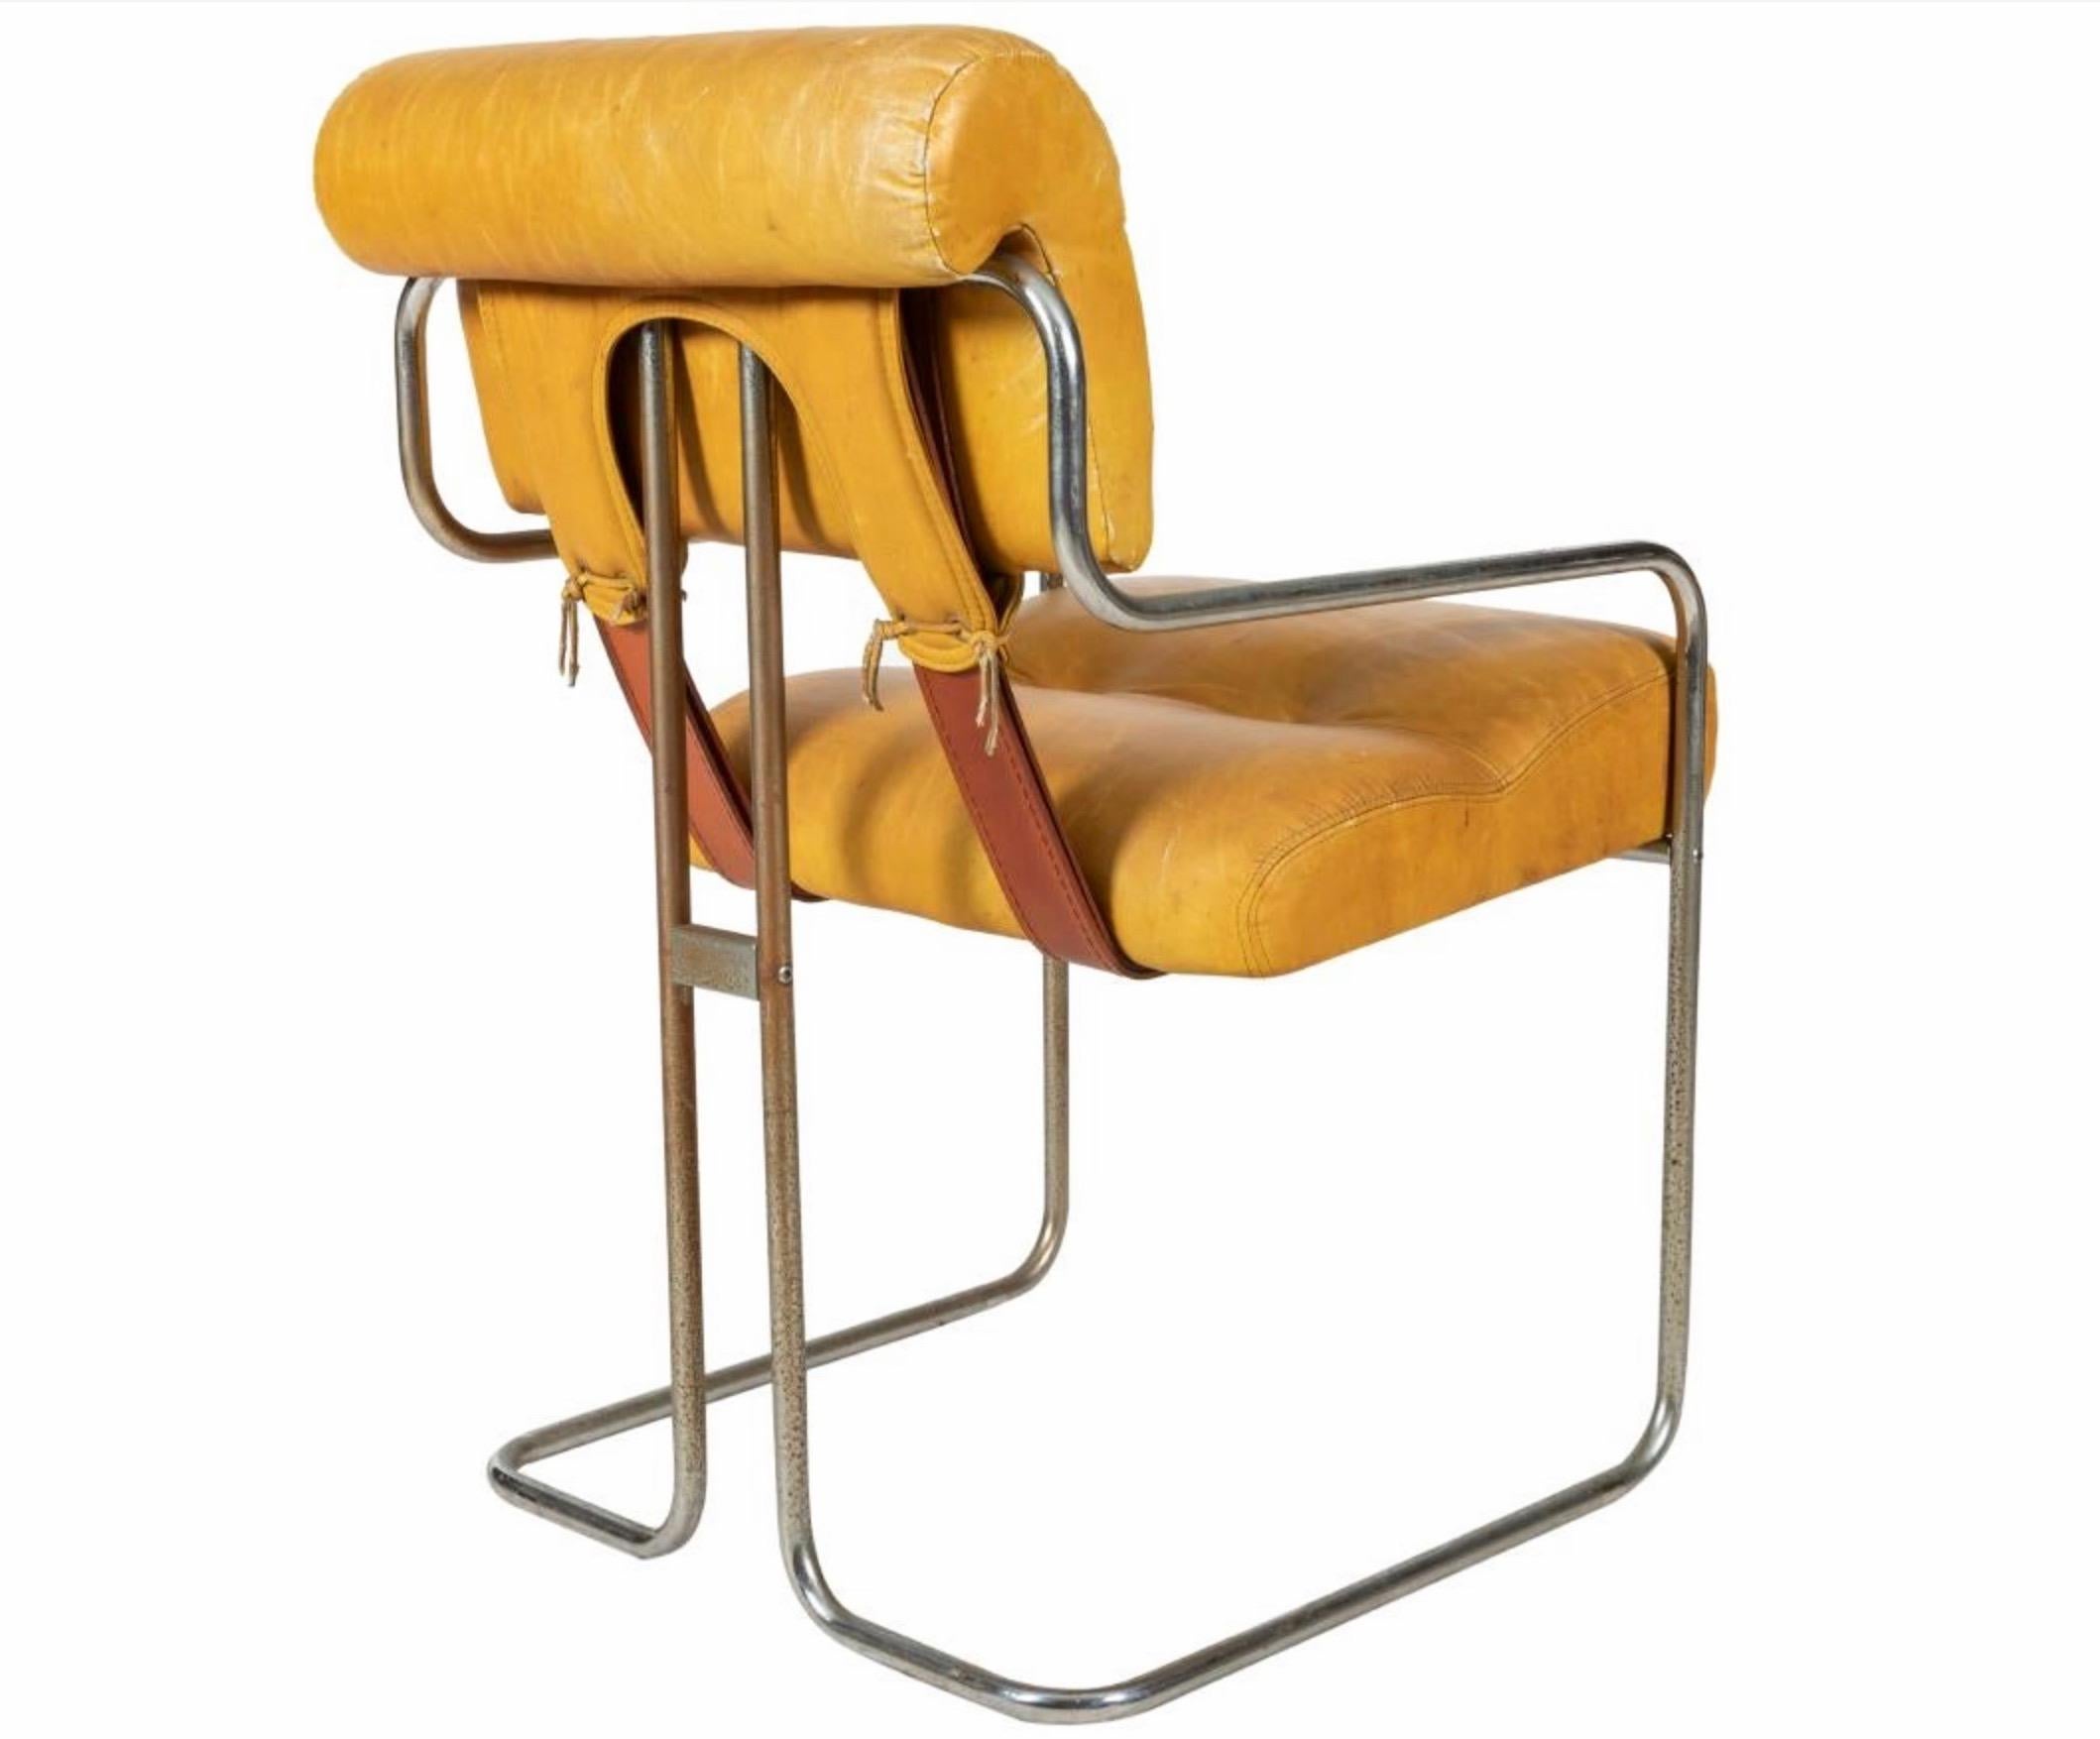 Classic leather chair by Guido Faleschini for Pace. Chrome chair with camel color leather. Great color and patina. Wear to chairs in varying degrees and worn condition. Priced as a set of 8. 